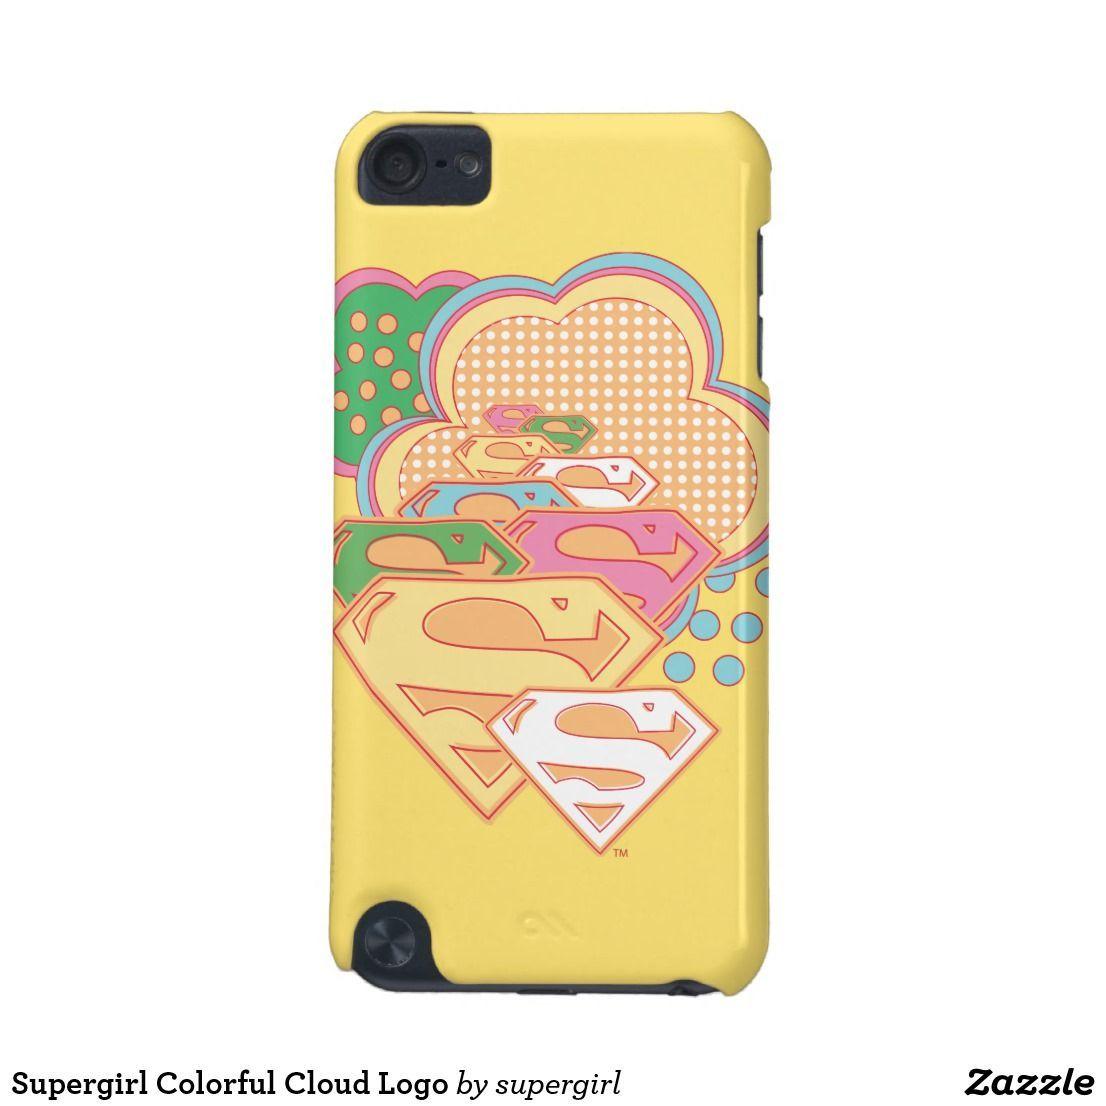 5th Comic Book Style Logo - Supergirl Colorful Cloud Logo iPod Touch (5th Generation) Case ...